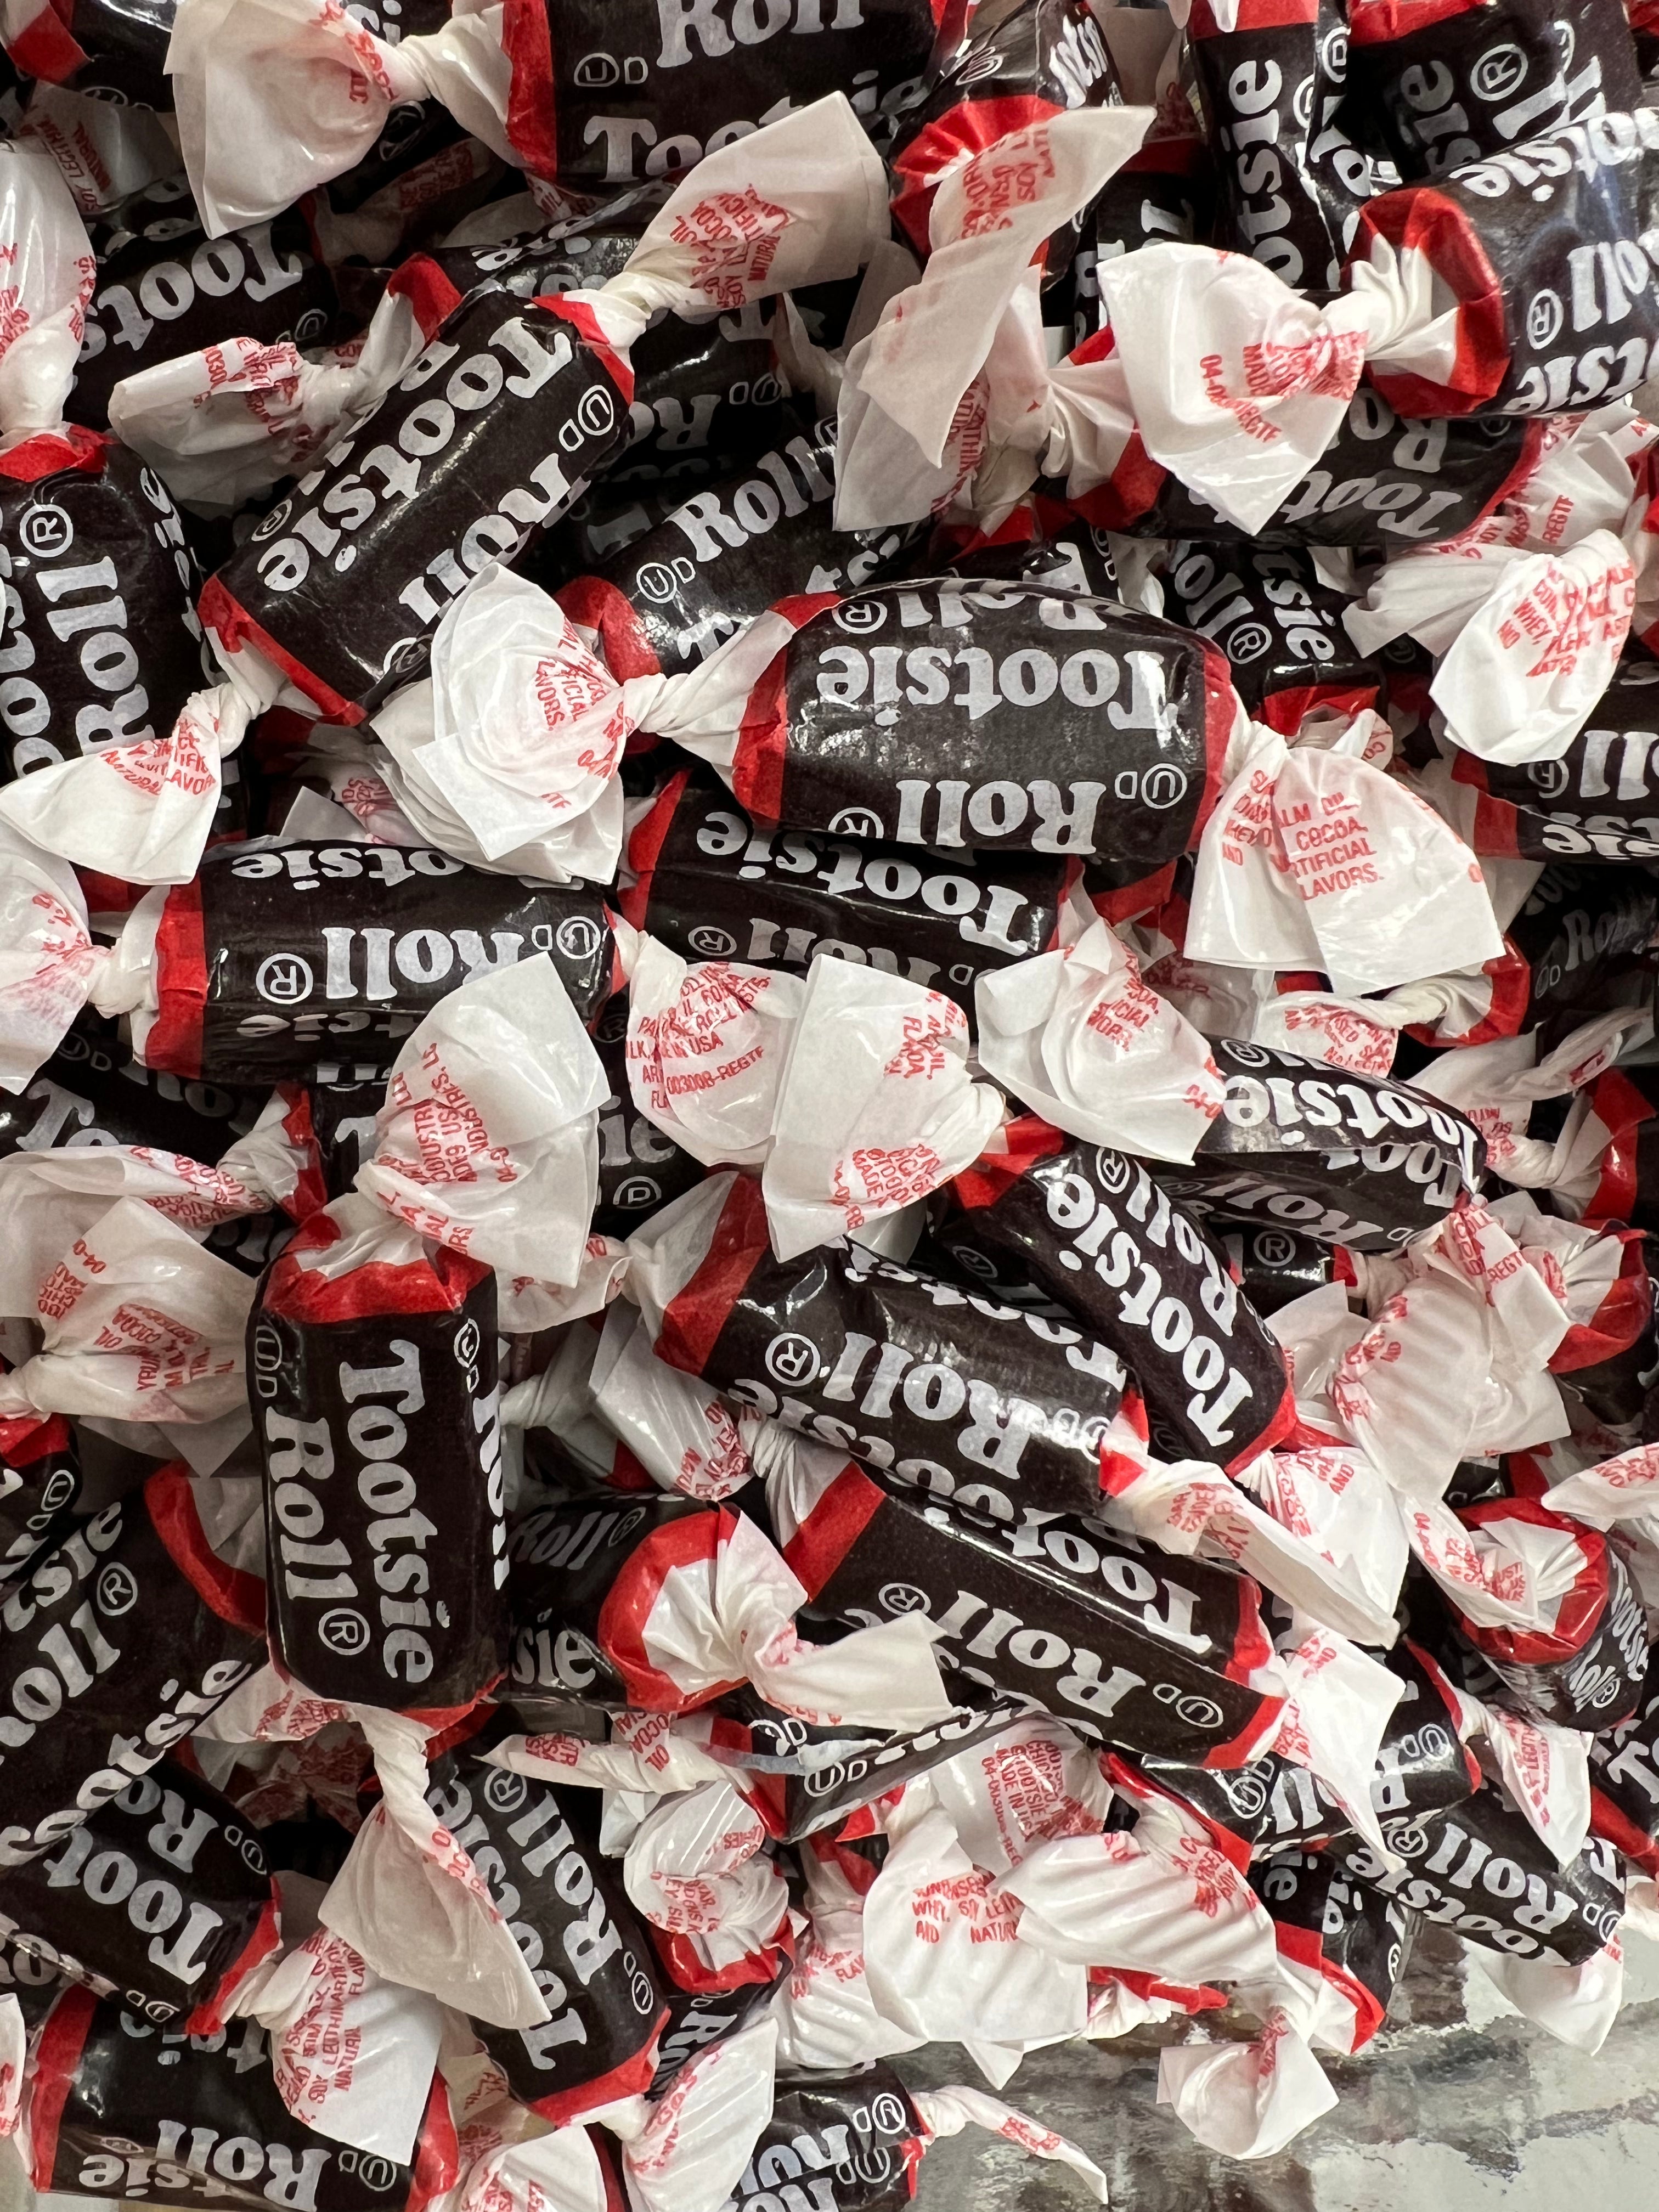 Small inch size wrapped tootsie roll pieces 